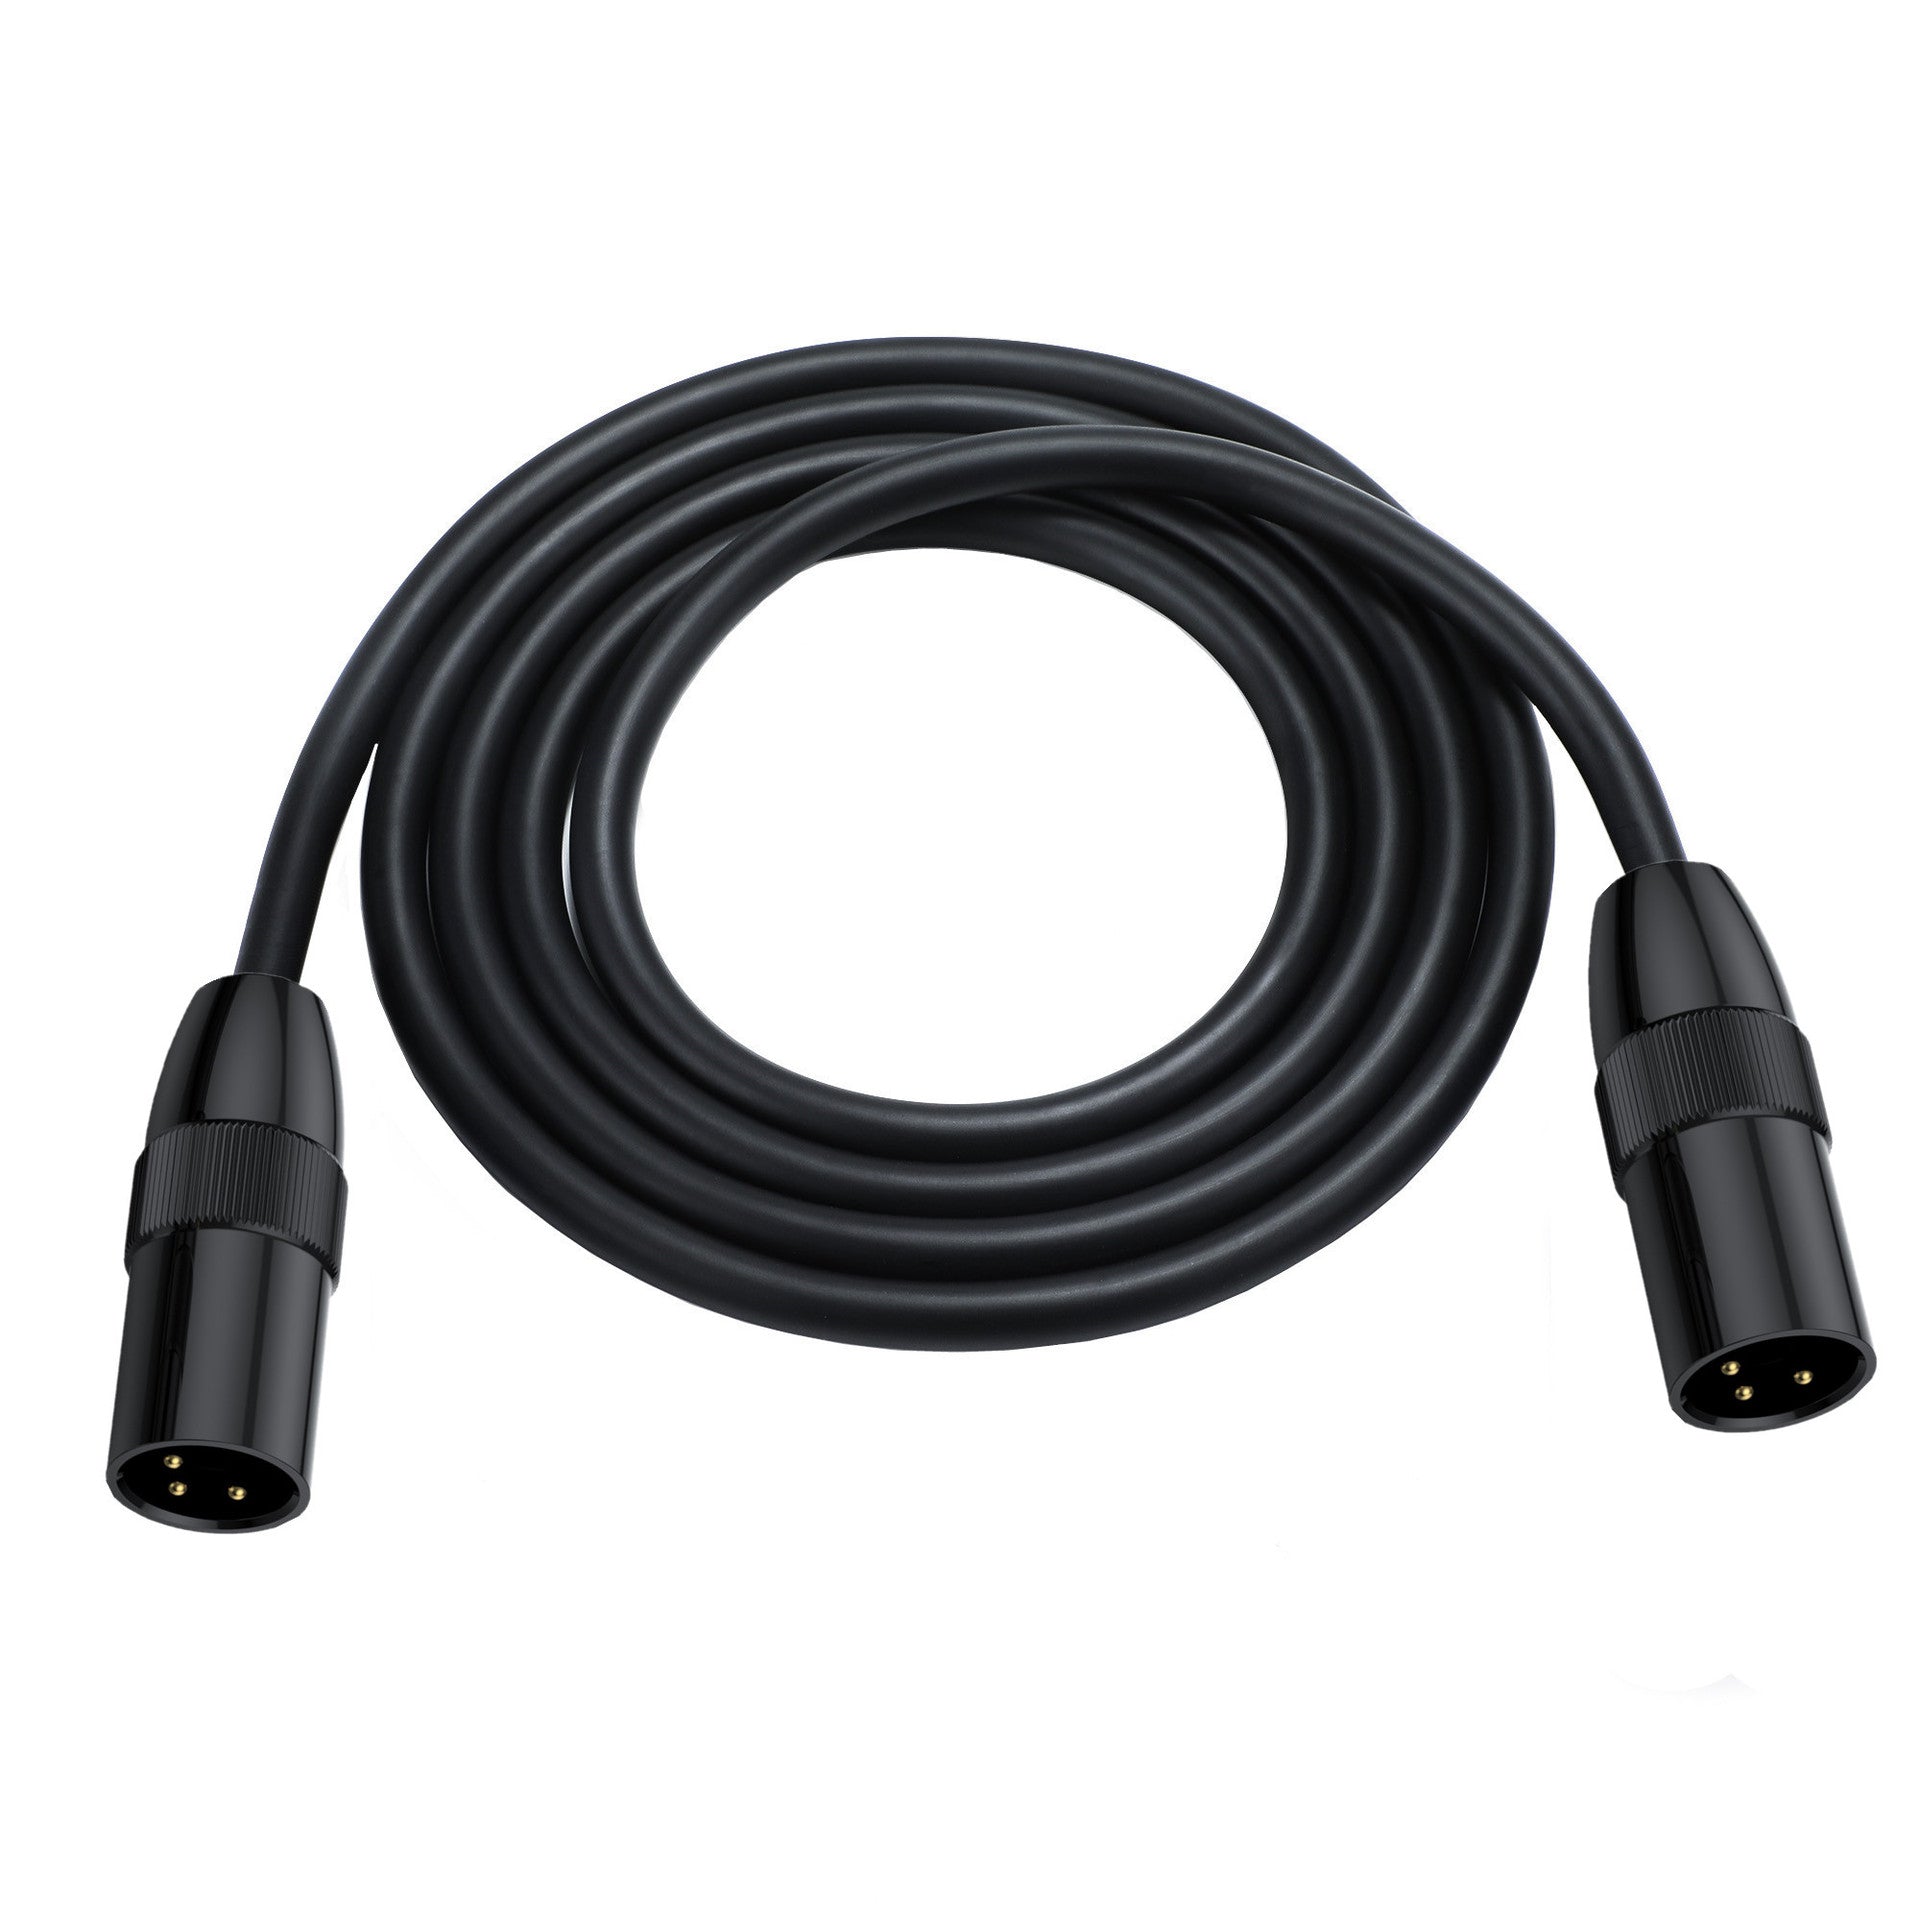 XLR 3Pin Male to Male Balanced Shielded Mic Cable for Mic Mixer, Recording Studio, Podcast, Speaker Systems